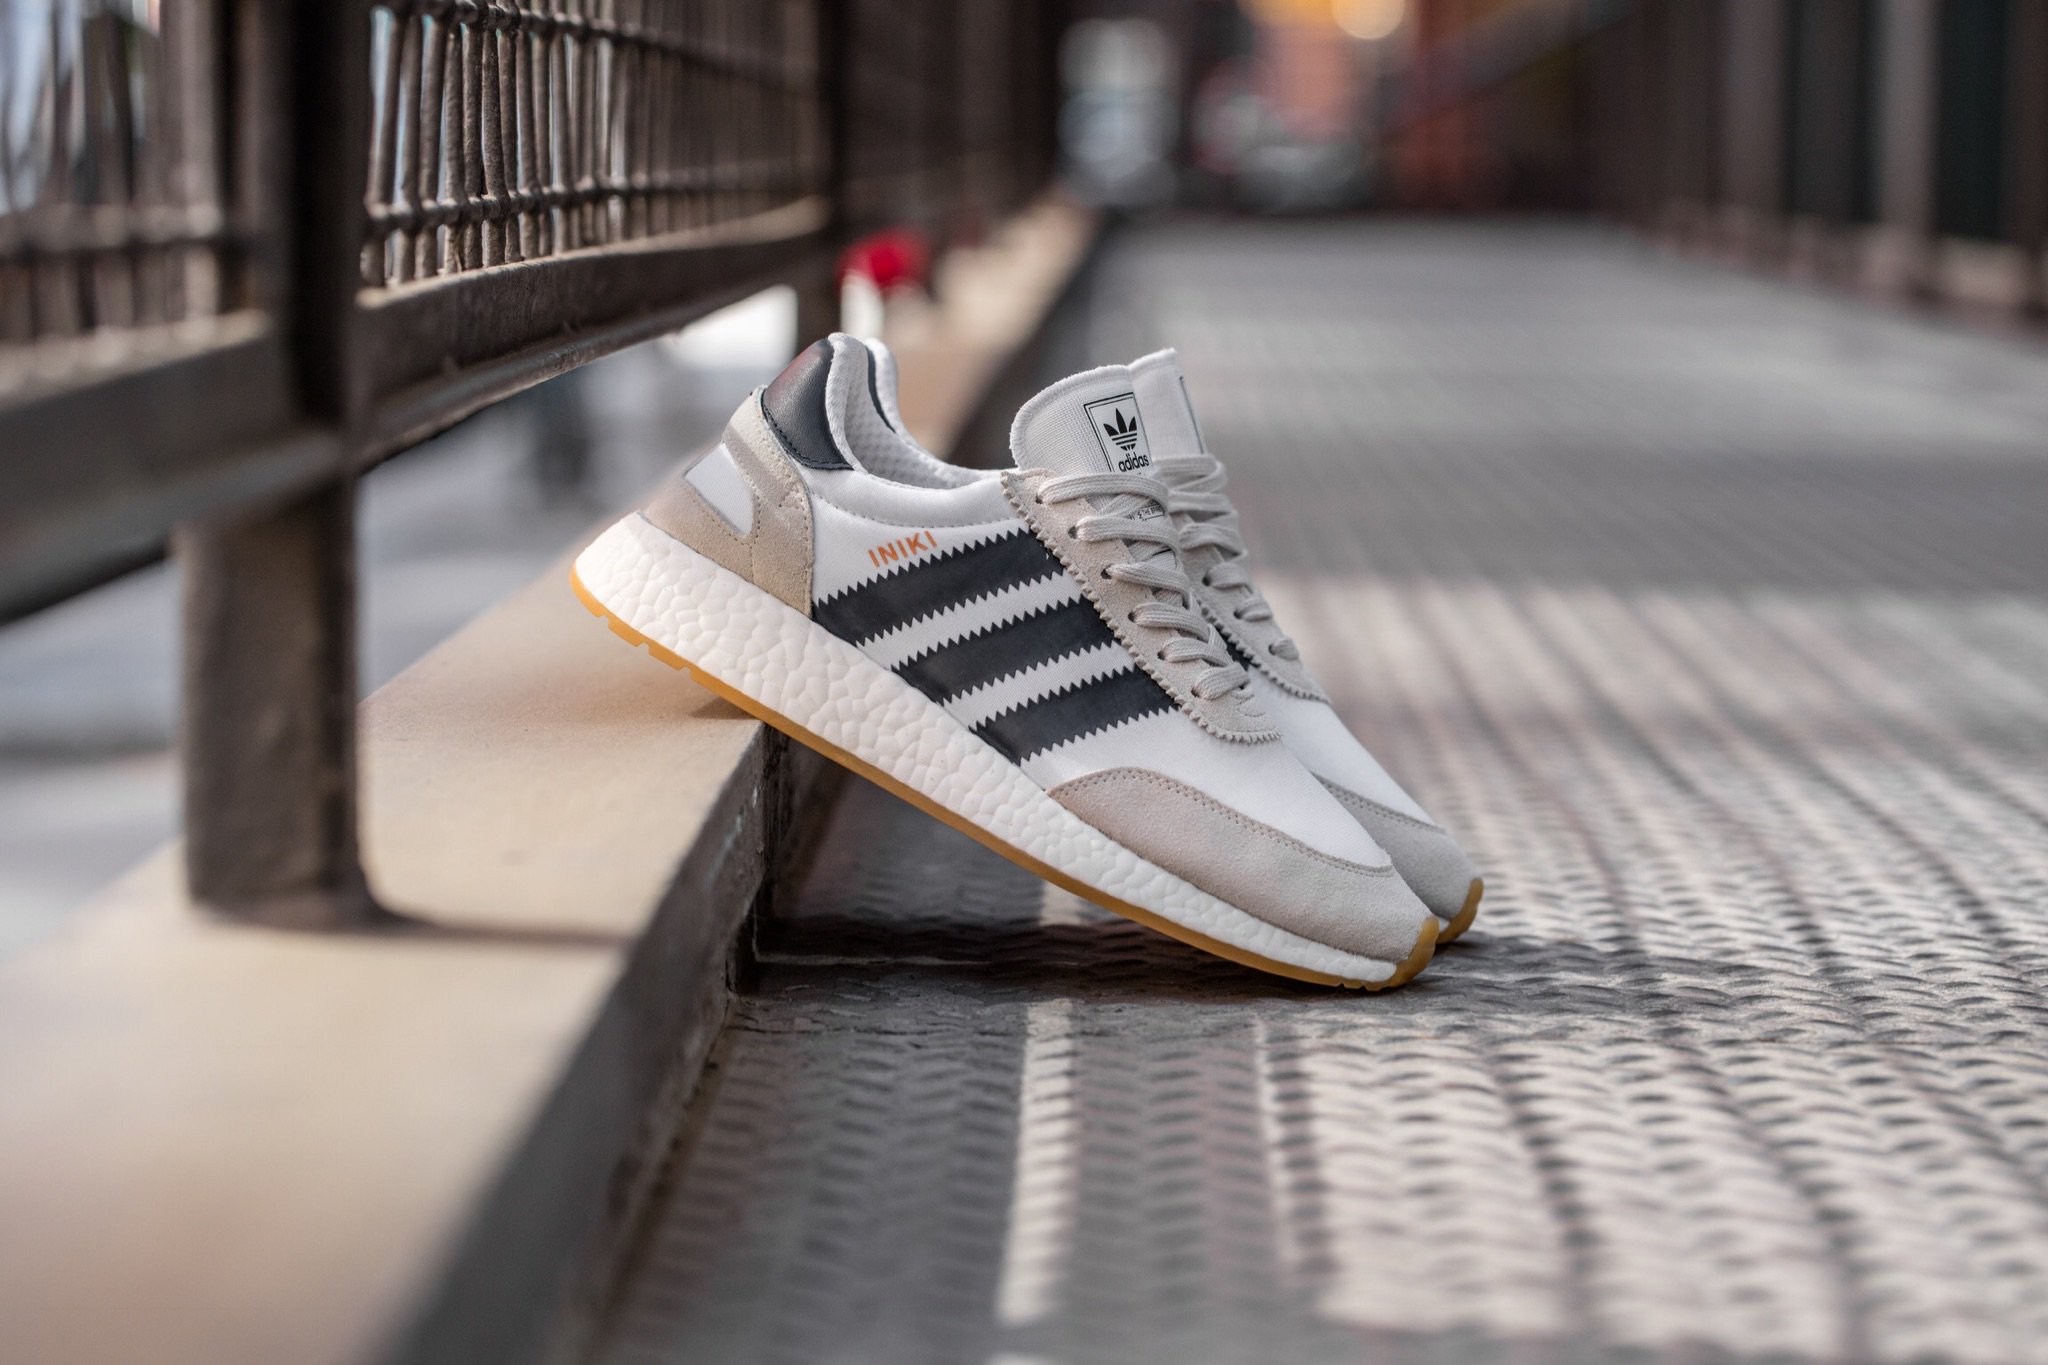 Concepts on Twitter: "adidas Originals Iniki Runner (White/Collegiate Navy) is now available in our Newbury Street &amp; New York locations # adidas https://t.co/1rlM1KhORV" / Twitter